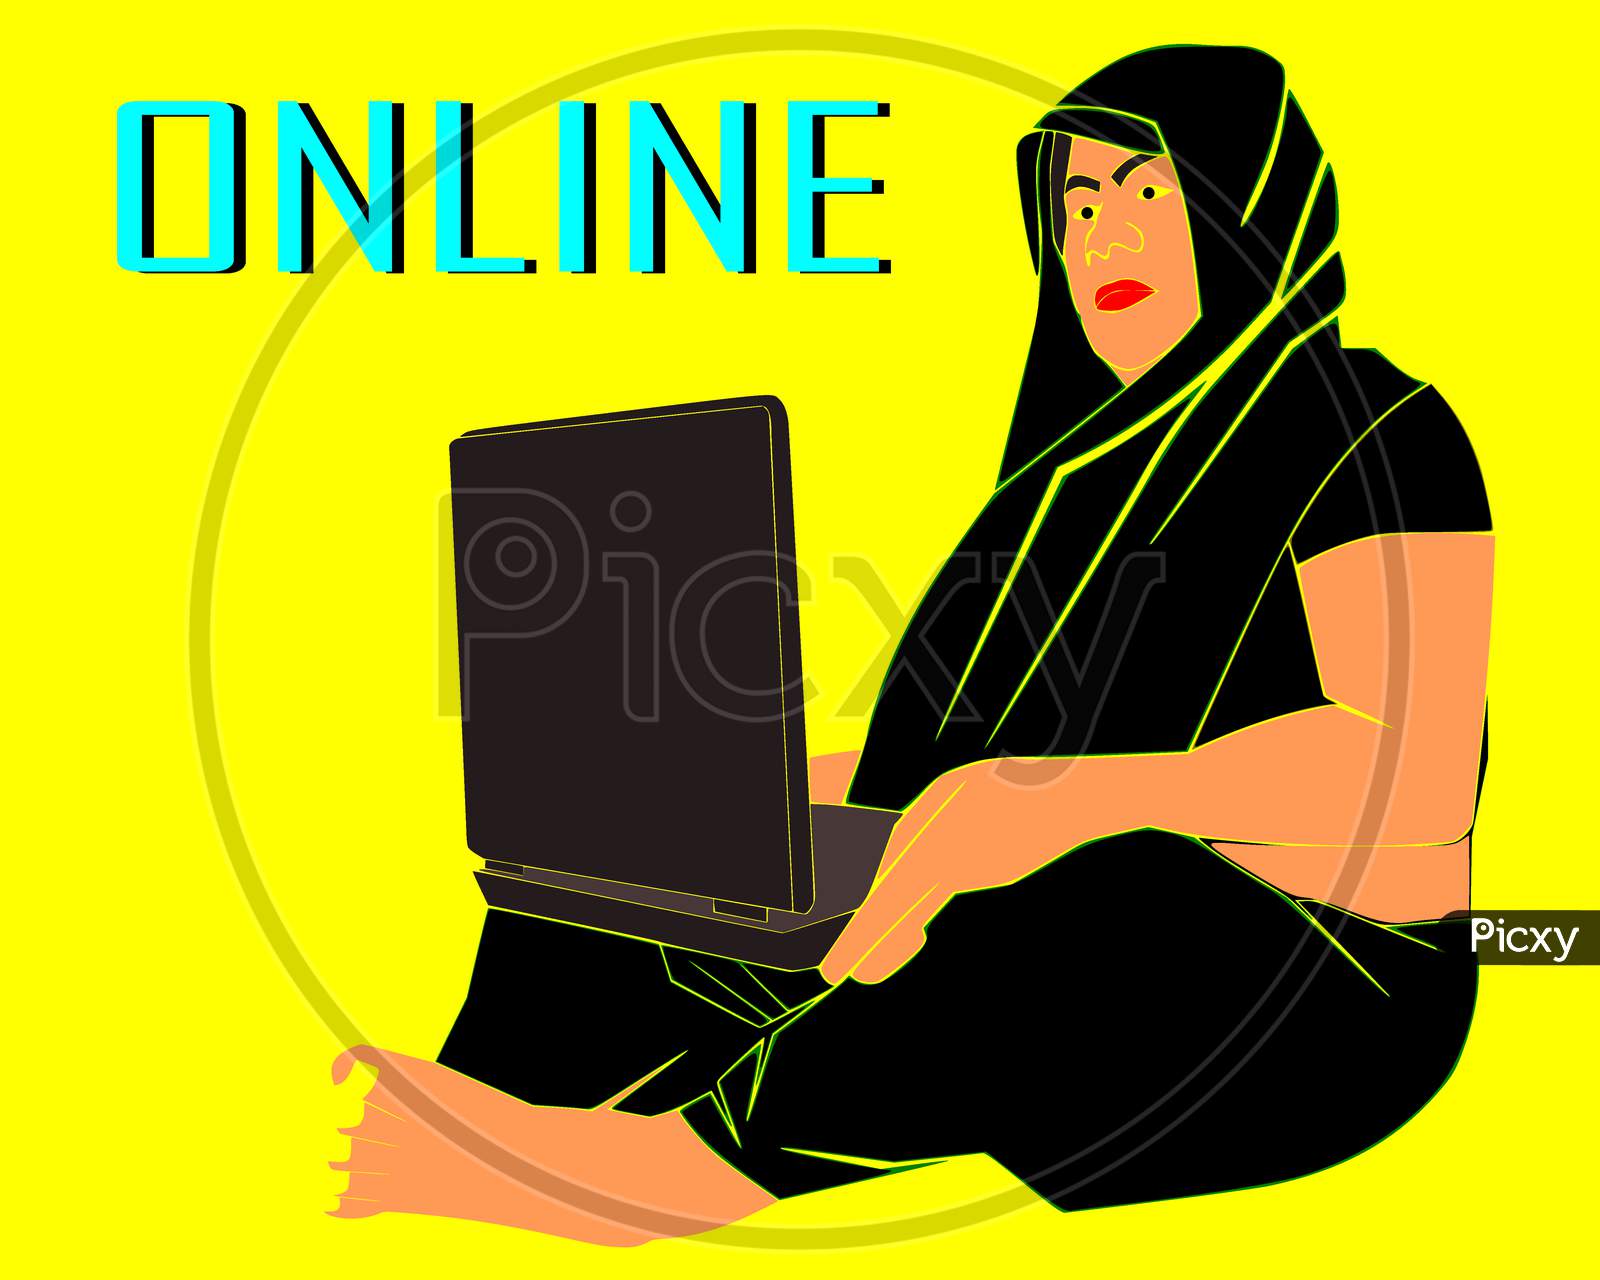 Indian Village Woman Technology Awareness About Computer Education Illustration.